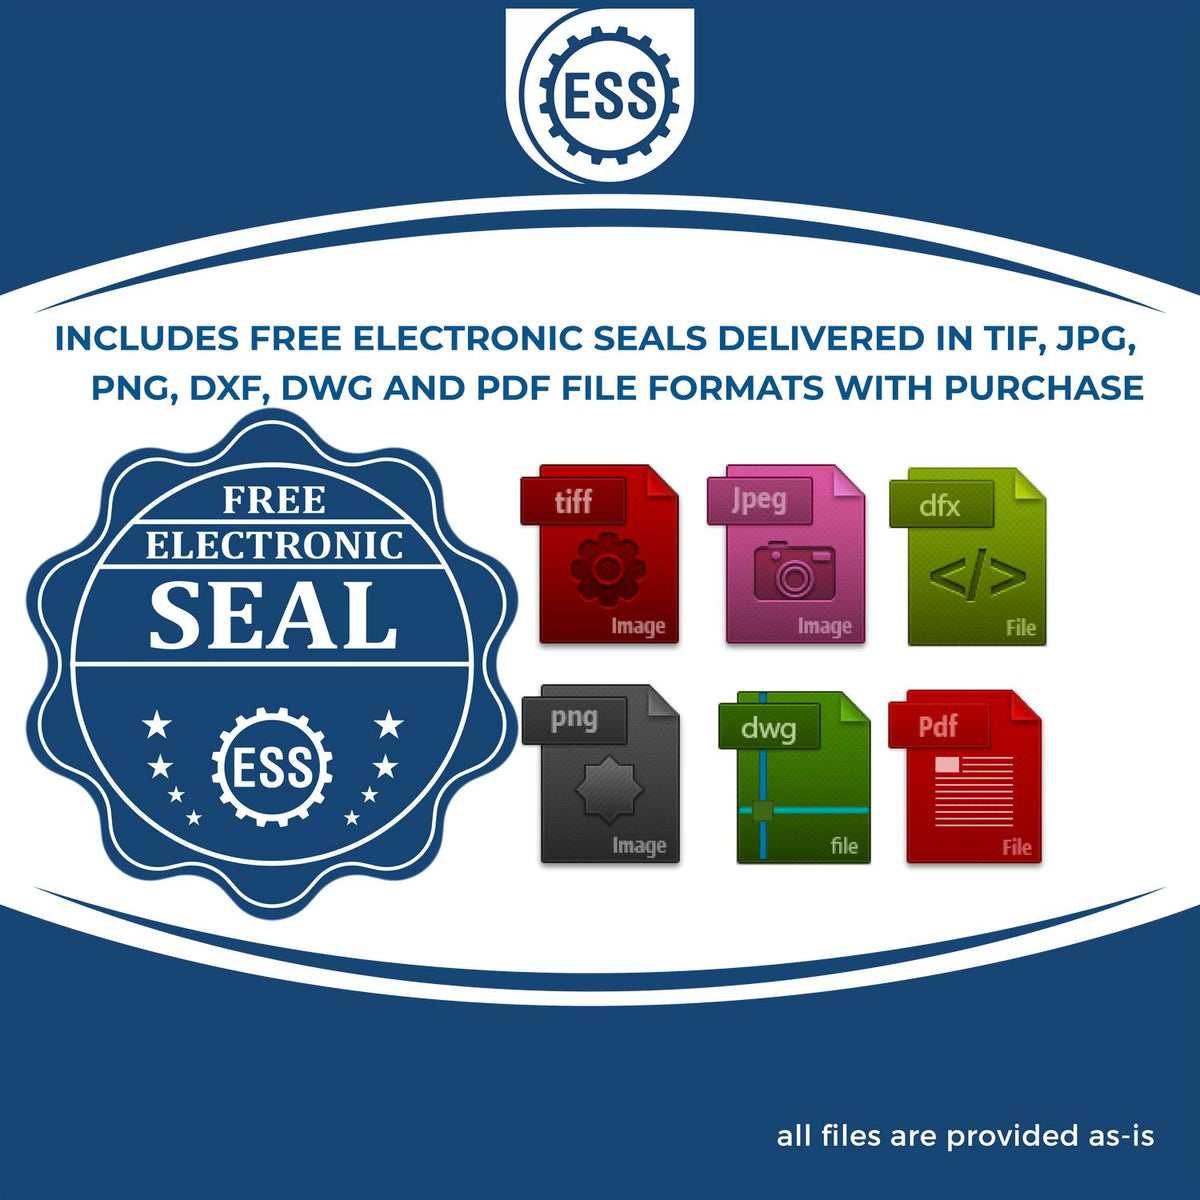 An infographic for the free electronic seal for the State of Alaska Extended Long Reach Engineer Seal illustrating the different file type icons such as DXF, DWG, TIF, JPG and PNG.